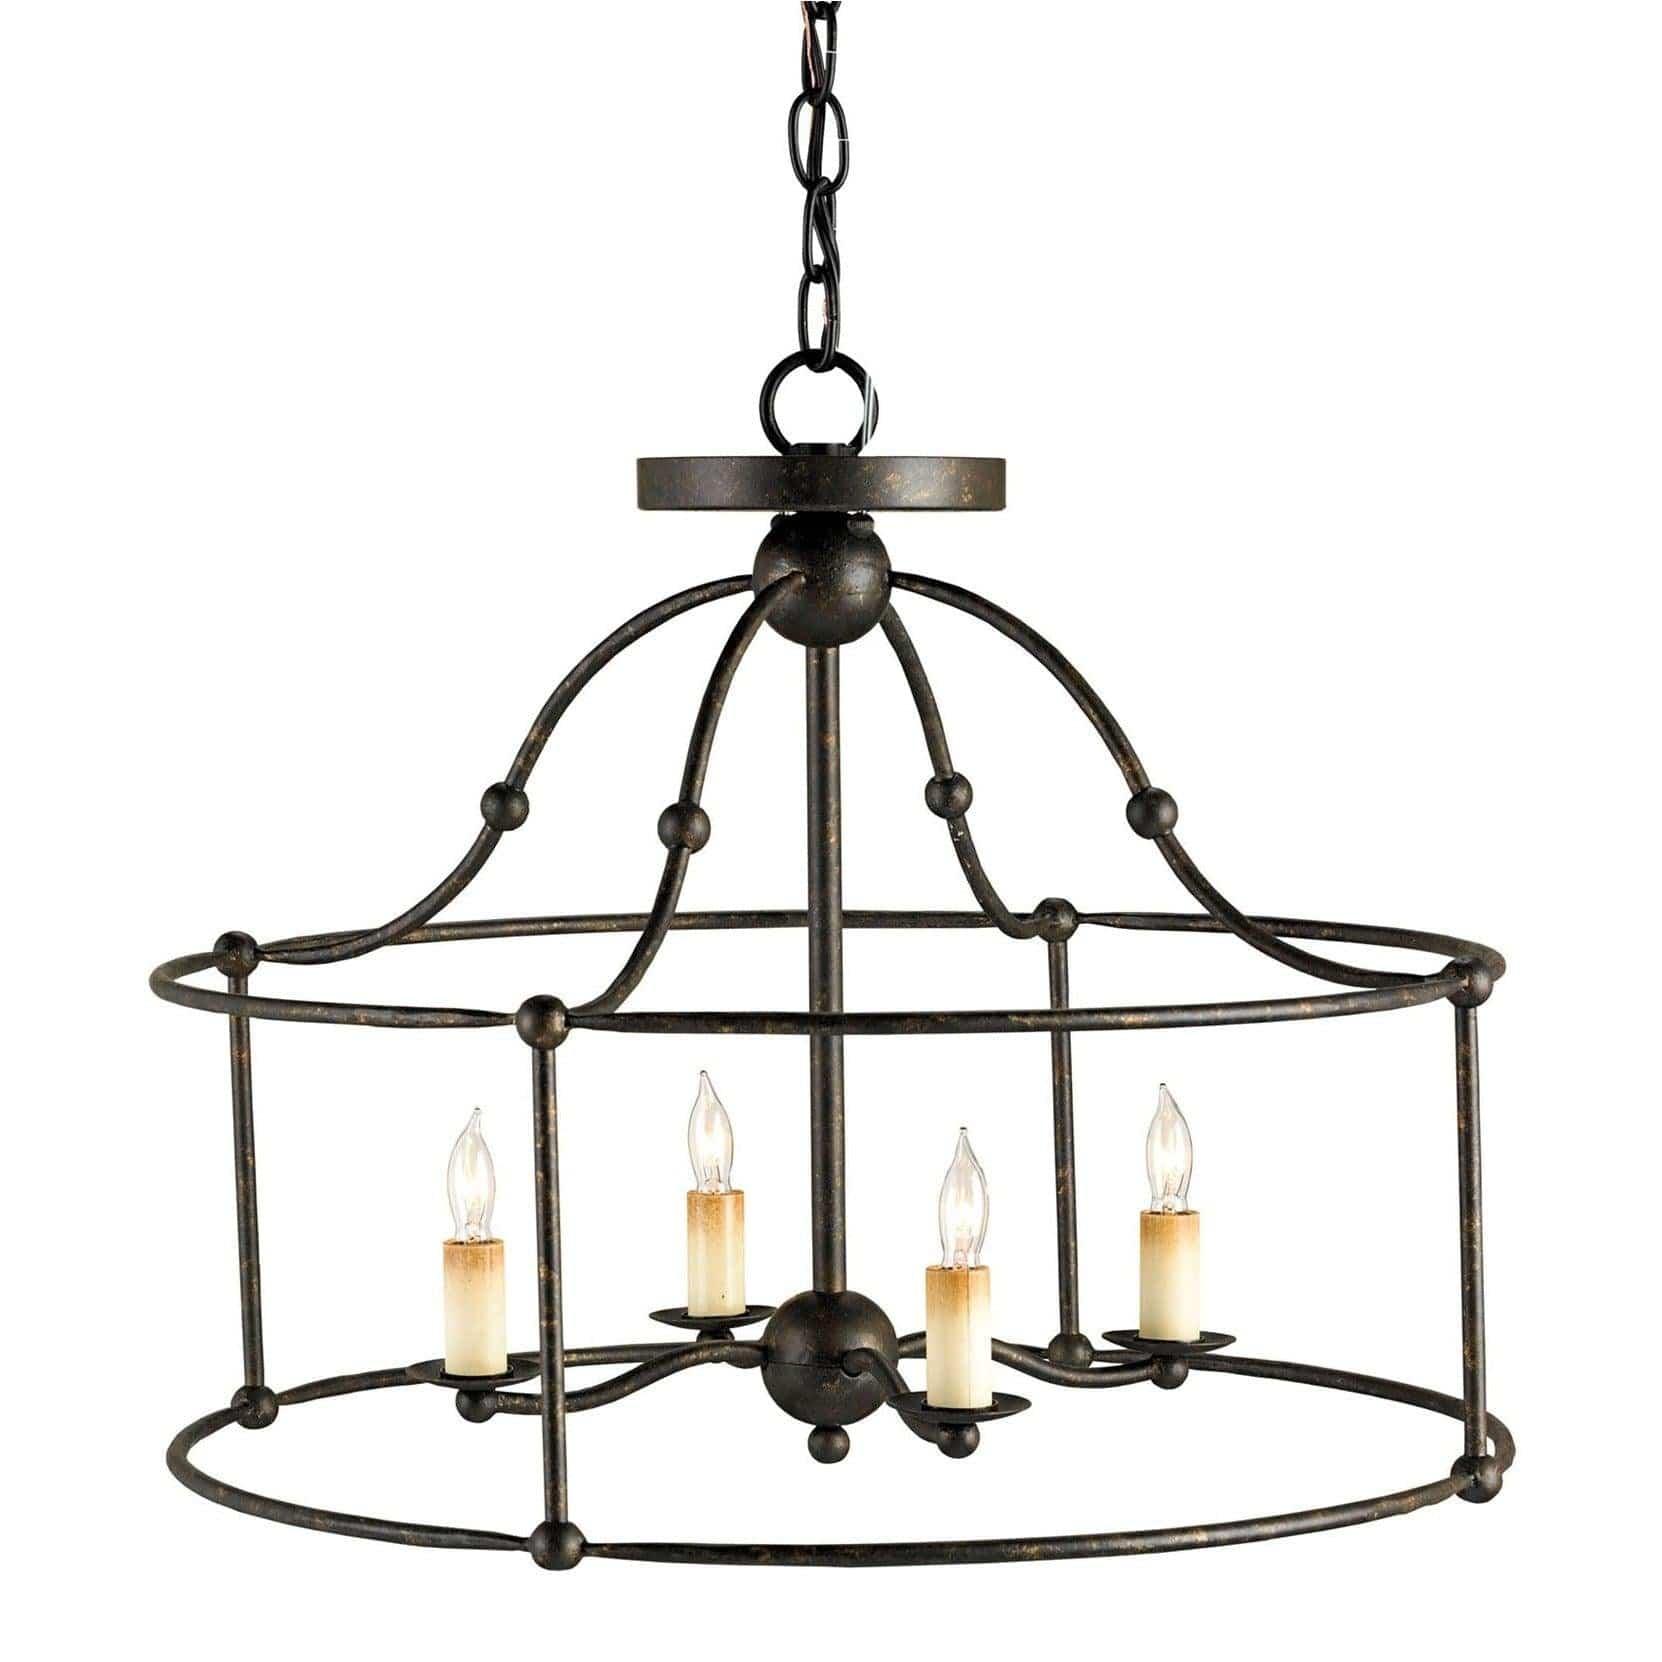 Currey and Company - Fitzjames Lantern - 9878 | Montreal Lighting & Hardware